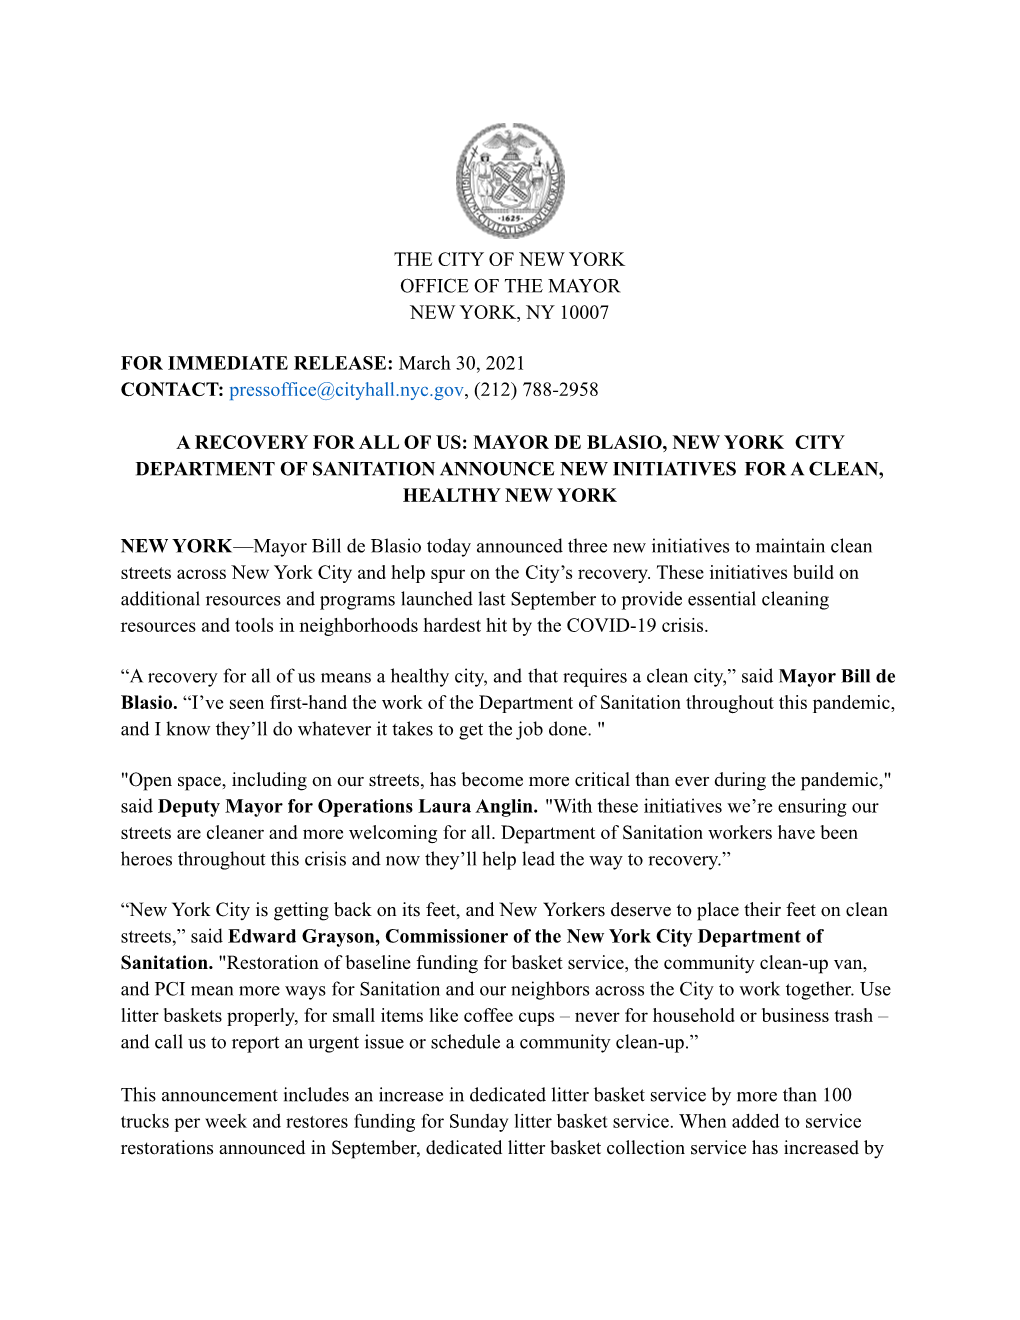 A Recovery for All of Us: Mayor De Blasio, New York City Department of Sanitation Announce New Initiatives for a Clean, Healthy New York